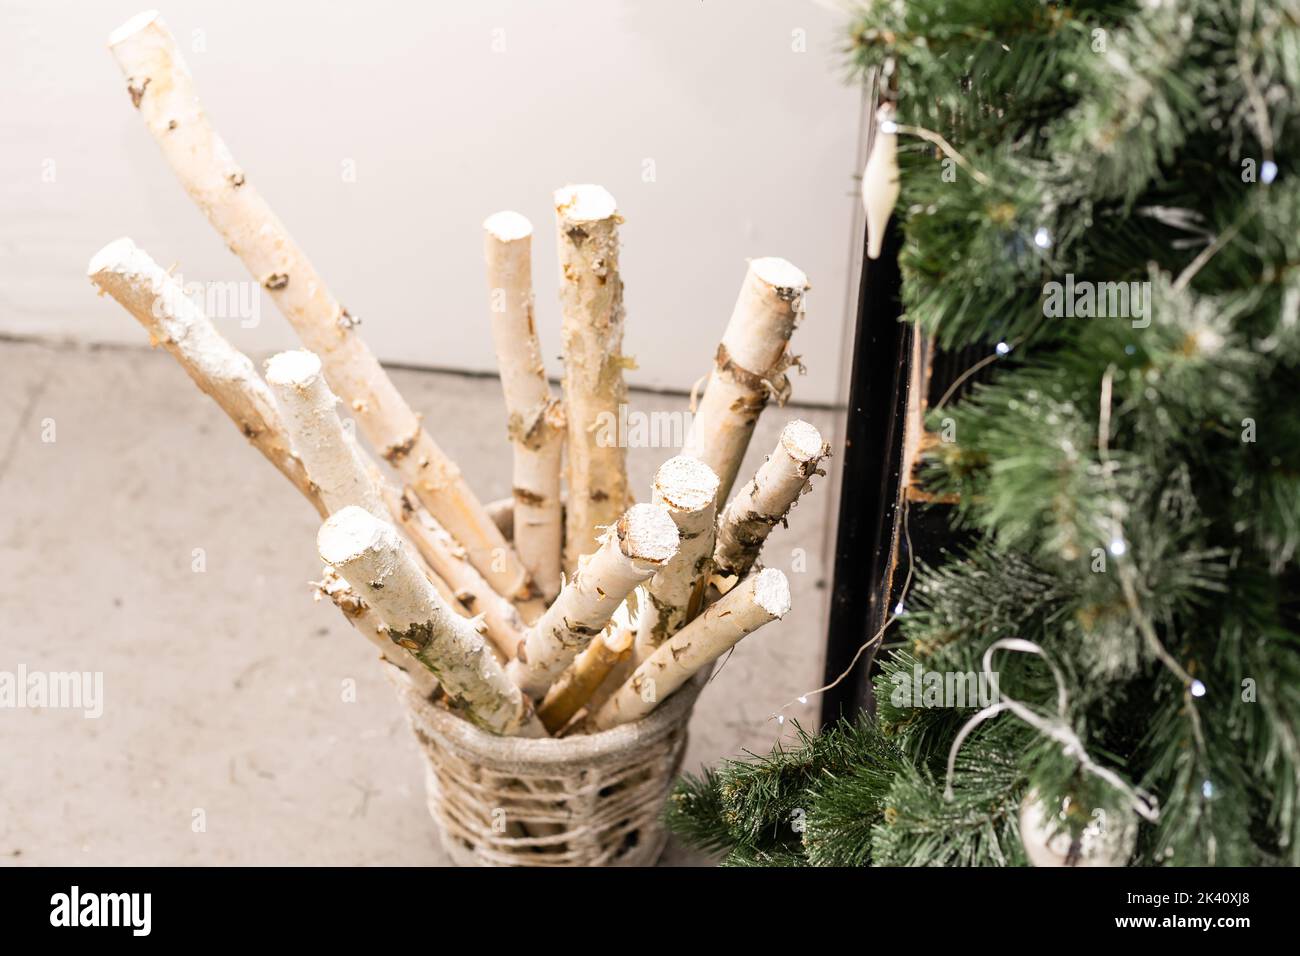 New Year decor of the Christmas tree. Wooden box with birch logs, decorated. Stock Photo